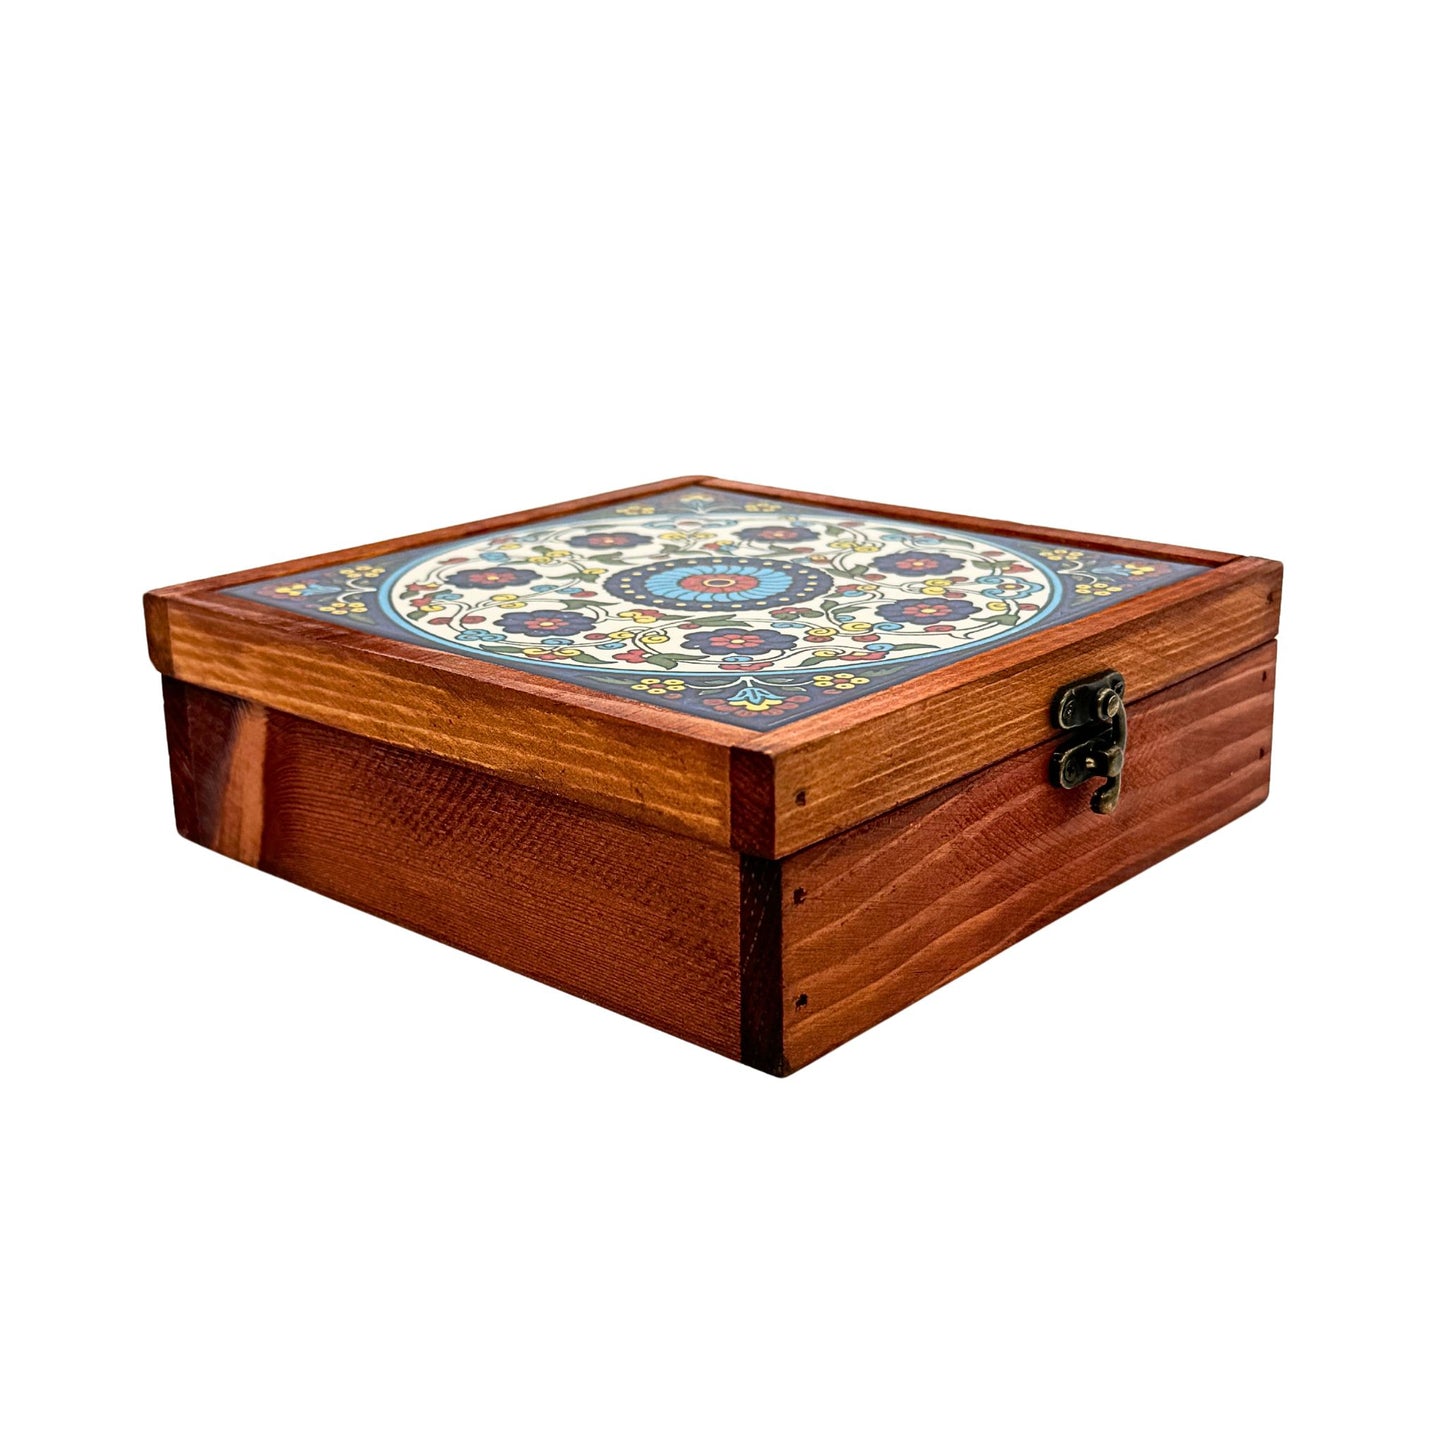 Wood and Ceramic Tile Box - Flowers